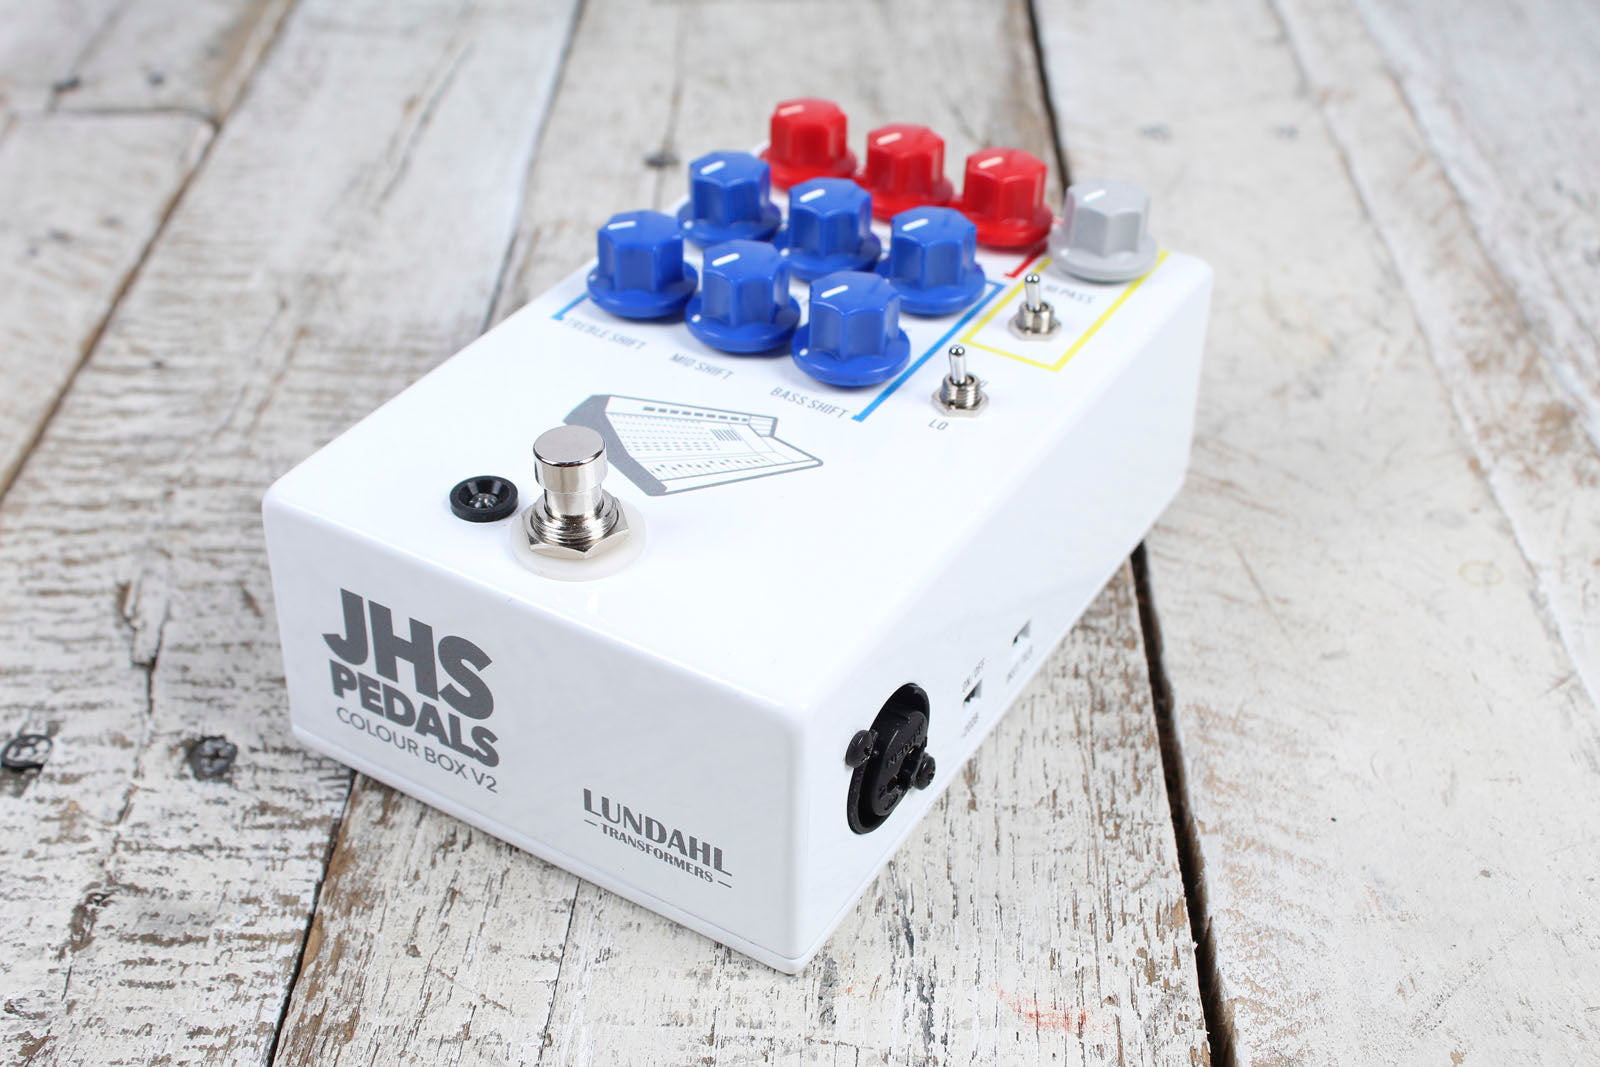 JHS Pedals Colour Box V2 Multi Instrument Preamp and Overdrive